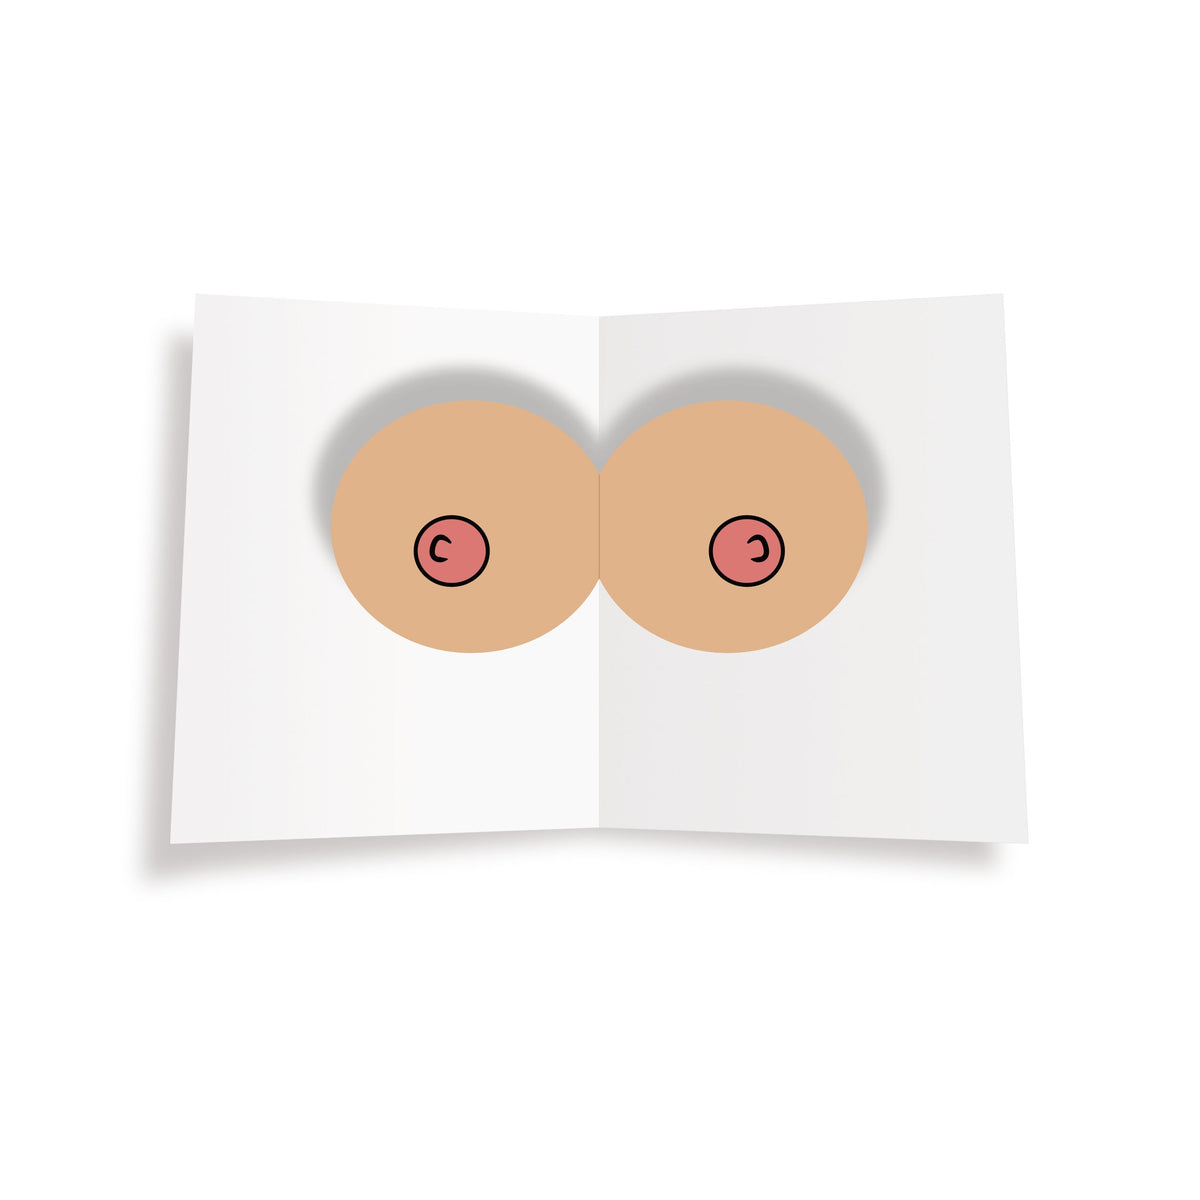 Tits The Season Pop Up Boob Card - Dicks By Mail - Anonymously